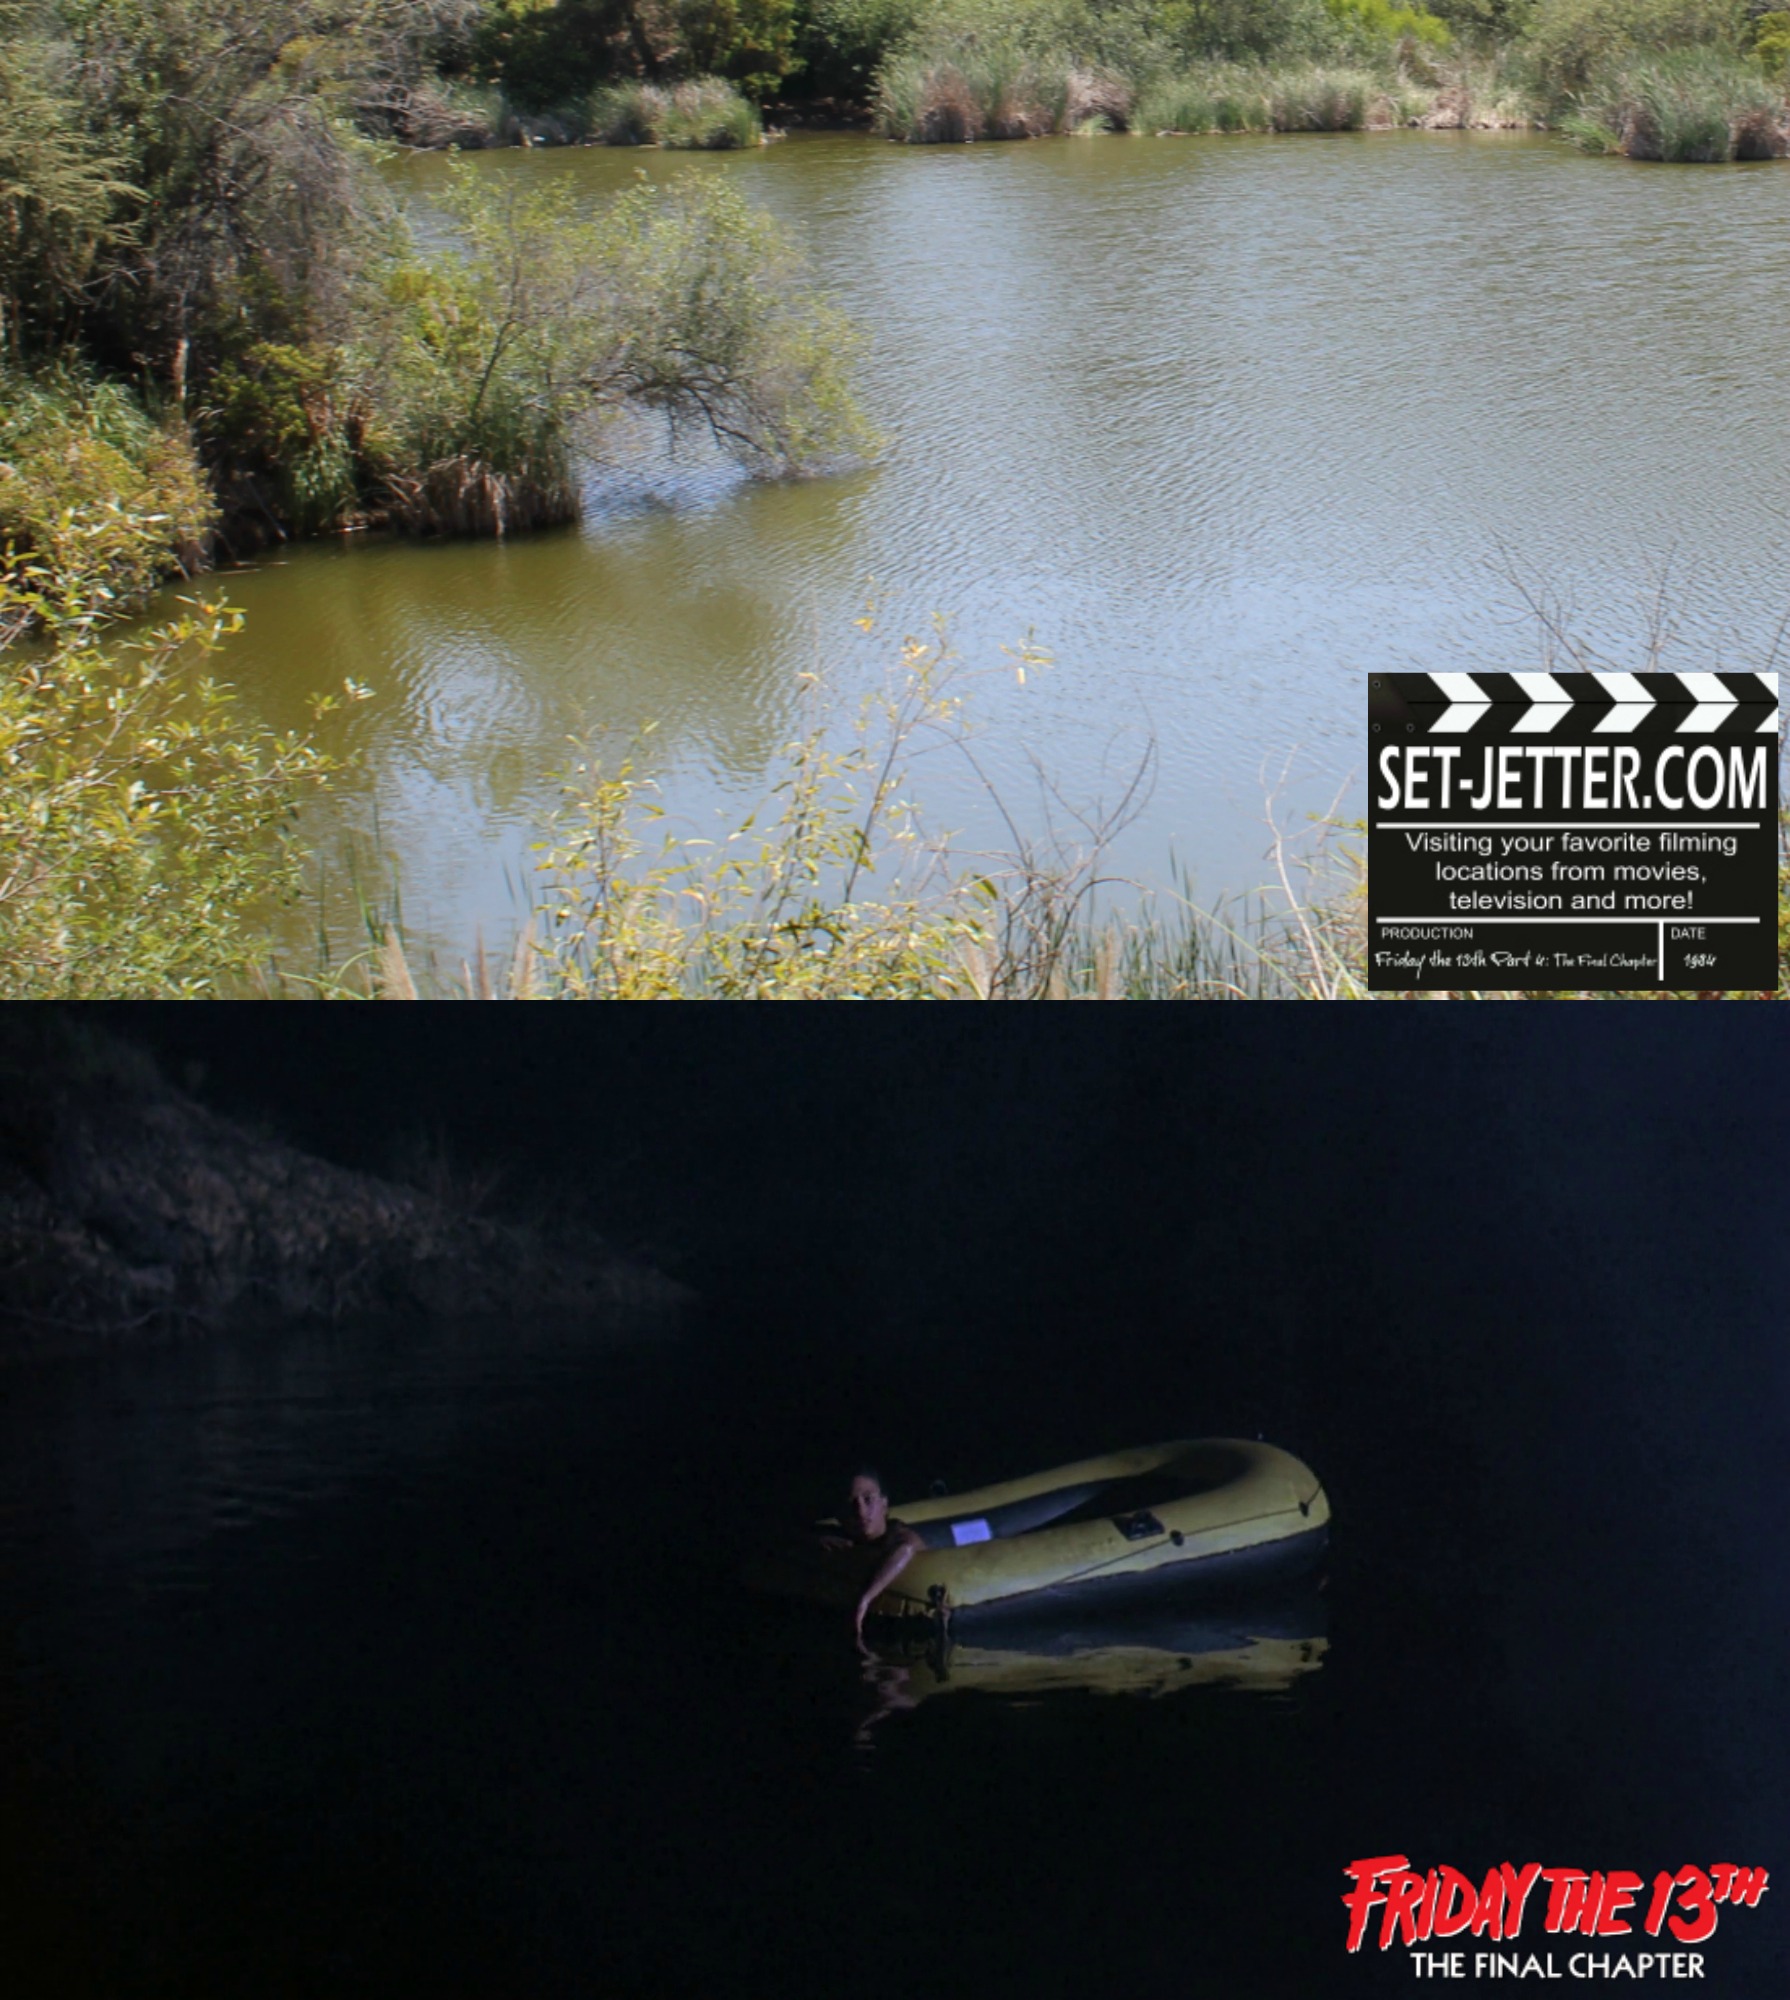 Friday the 13th The Final Chapter comparison 91.jpg